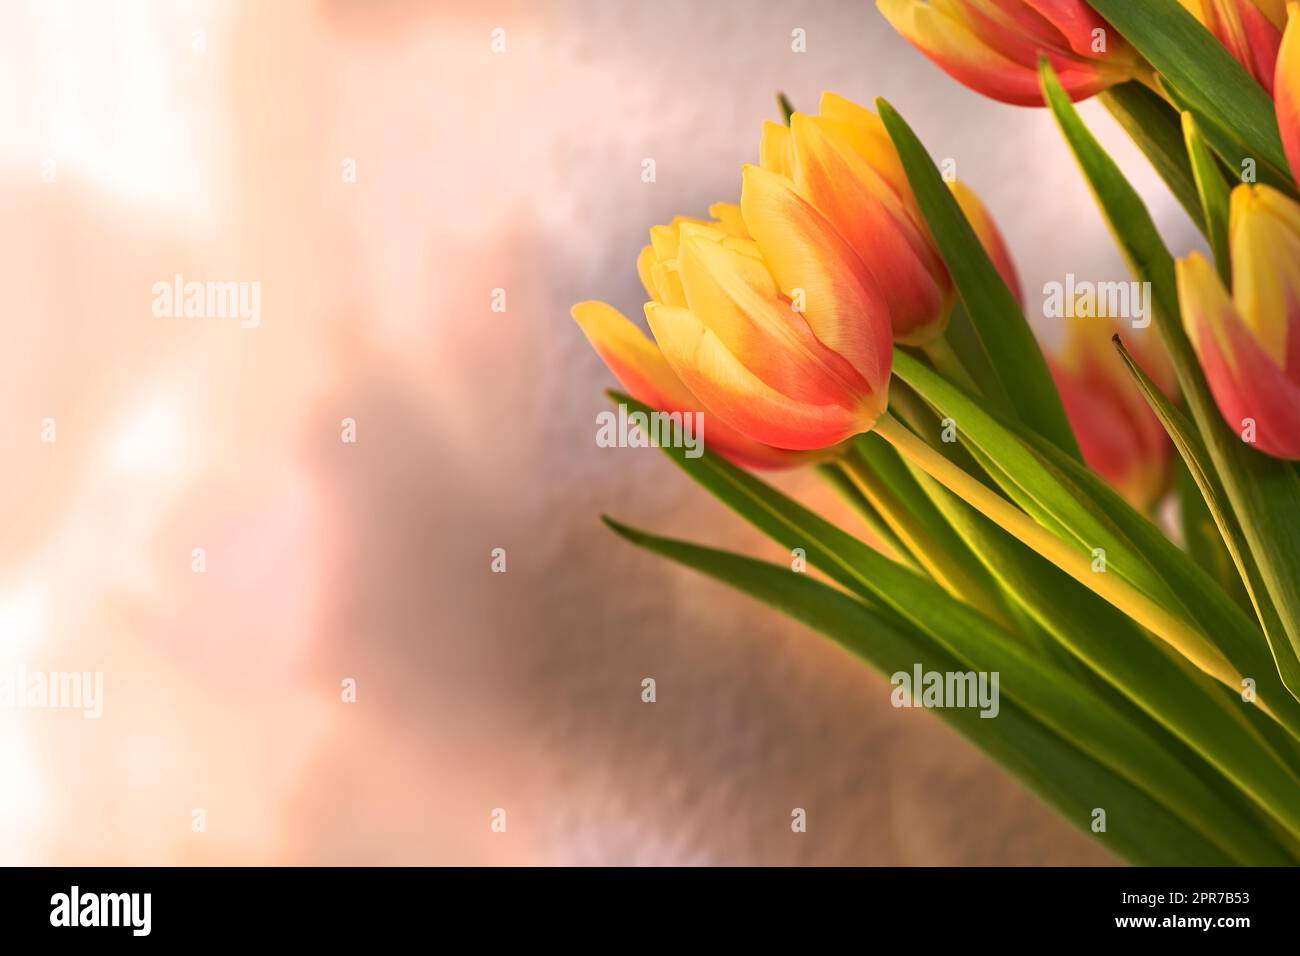 Copyspace with orange and yellow tulips. Closeup of a bunch of beautiful flowers with vibrant petals and green stems. Blossoming bouquet with floral scent symbolizing hope and love for valentines day Stock Photo